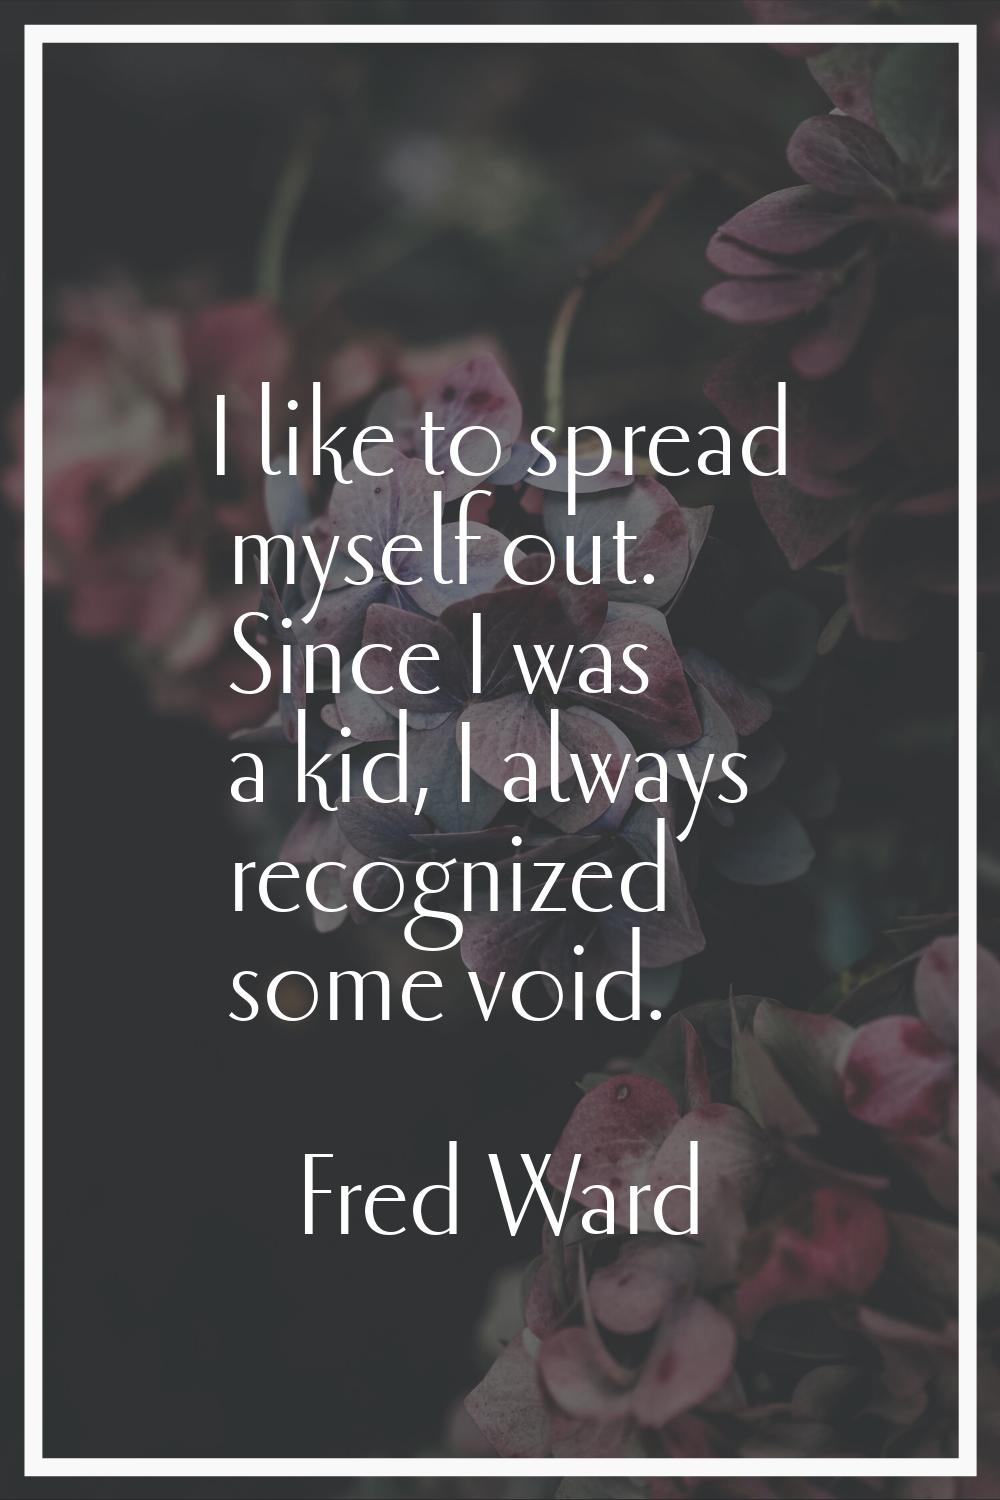 I like to spread myself out. Since I was a kid, I always recognized some void.